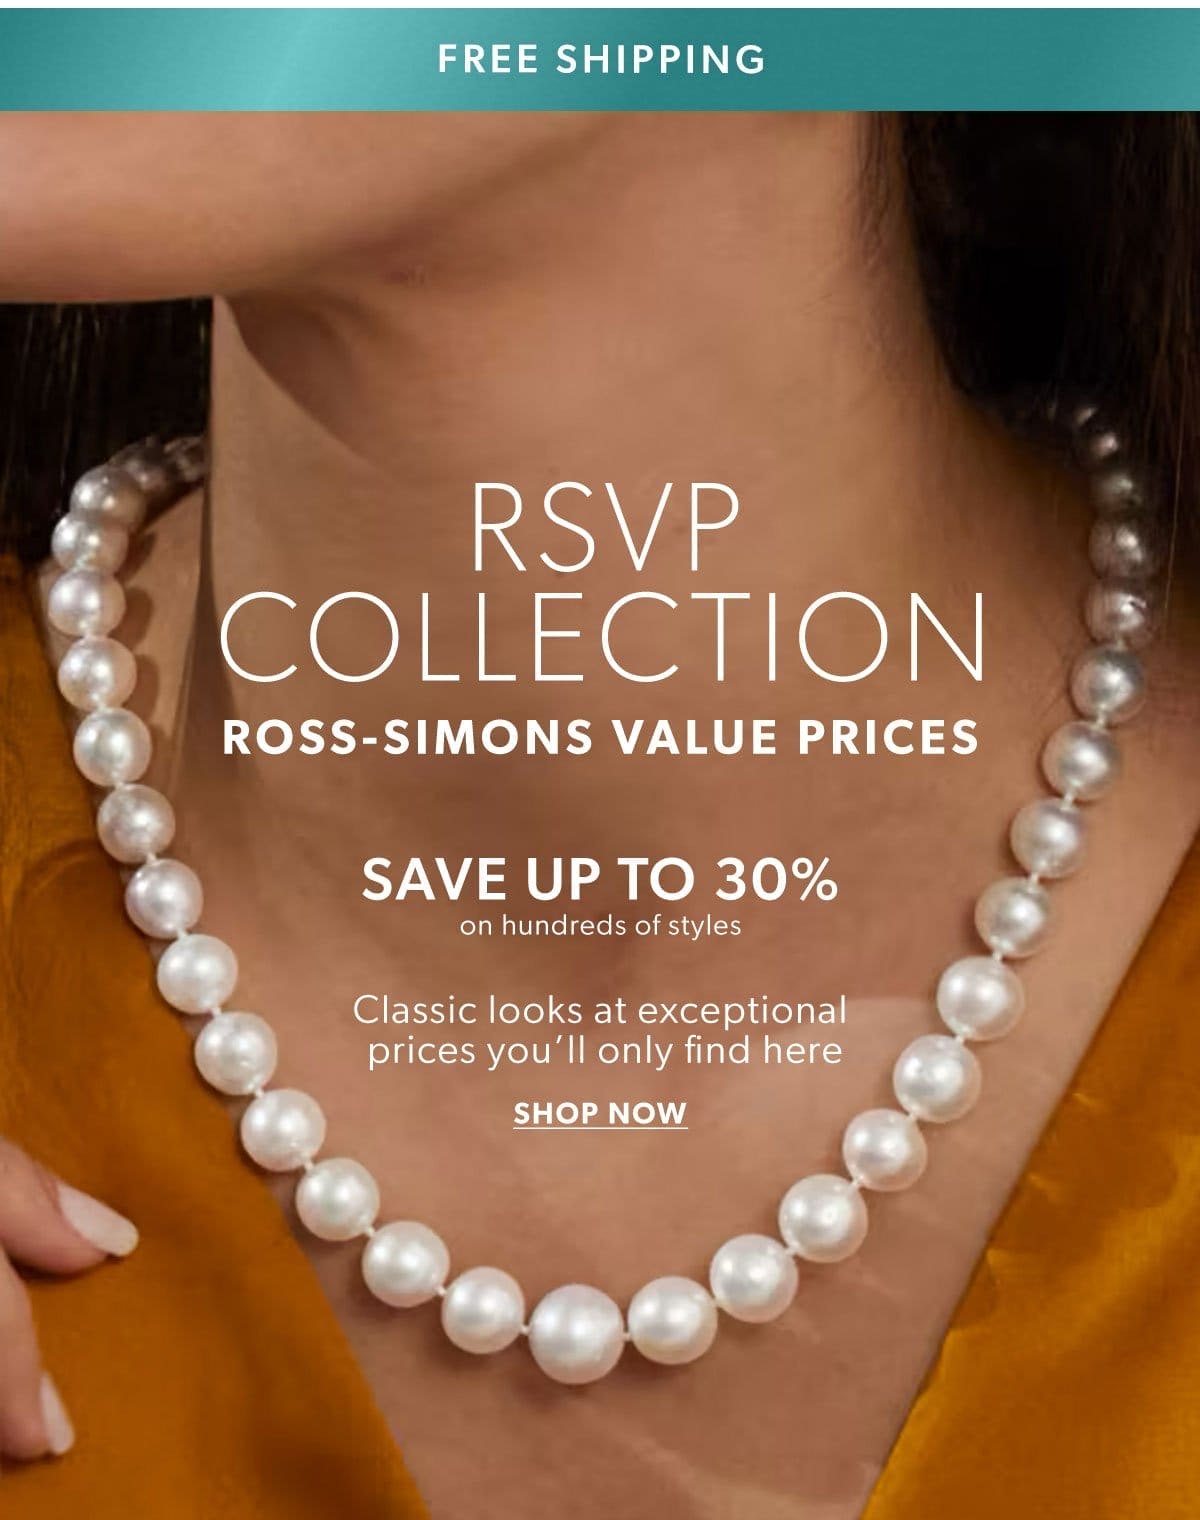 RSVP Collection. Save Up To 30%. Shop Now